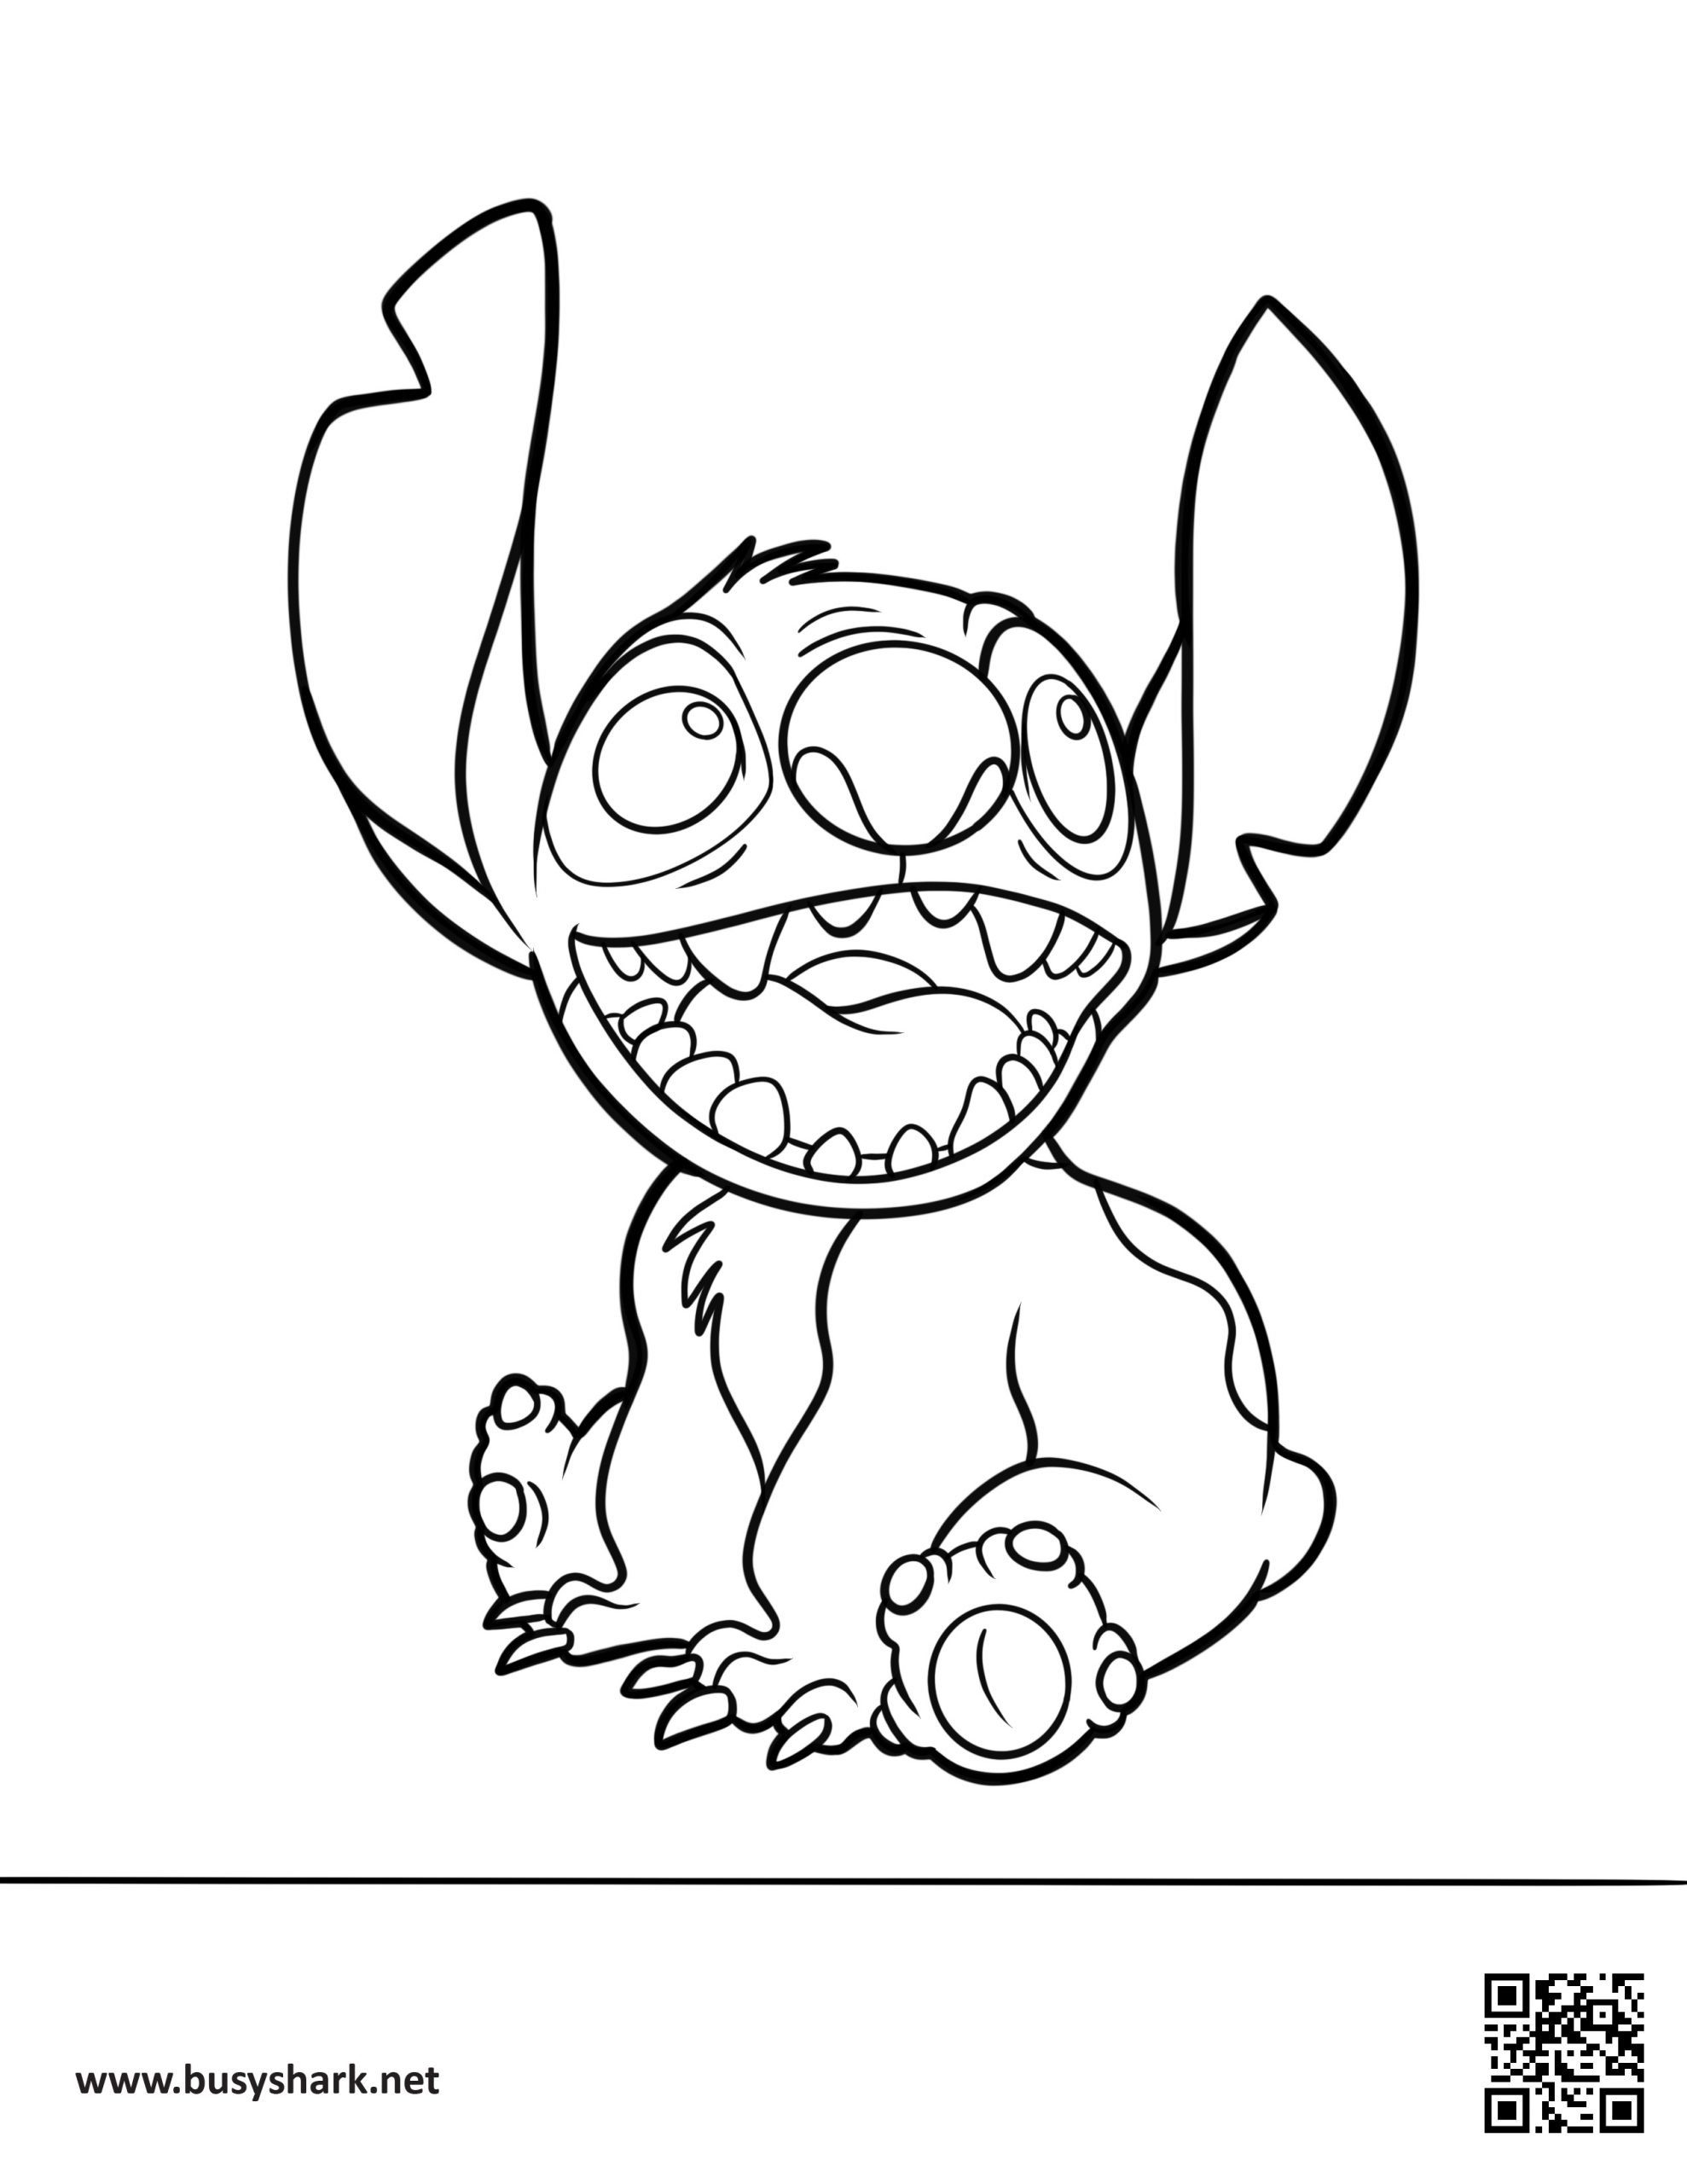 Stitch coloring page free printable